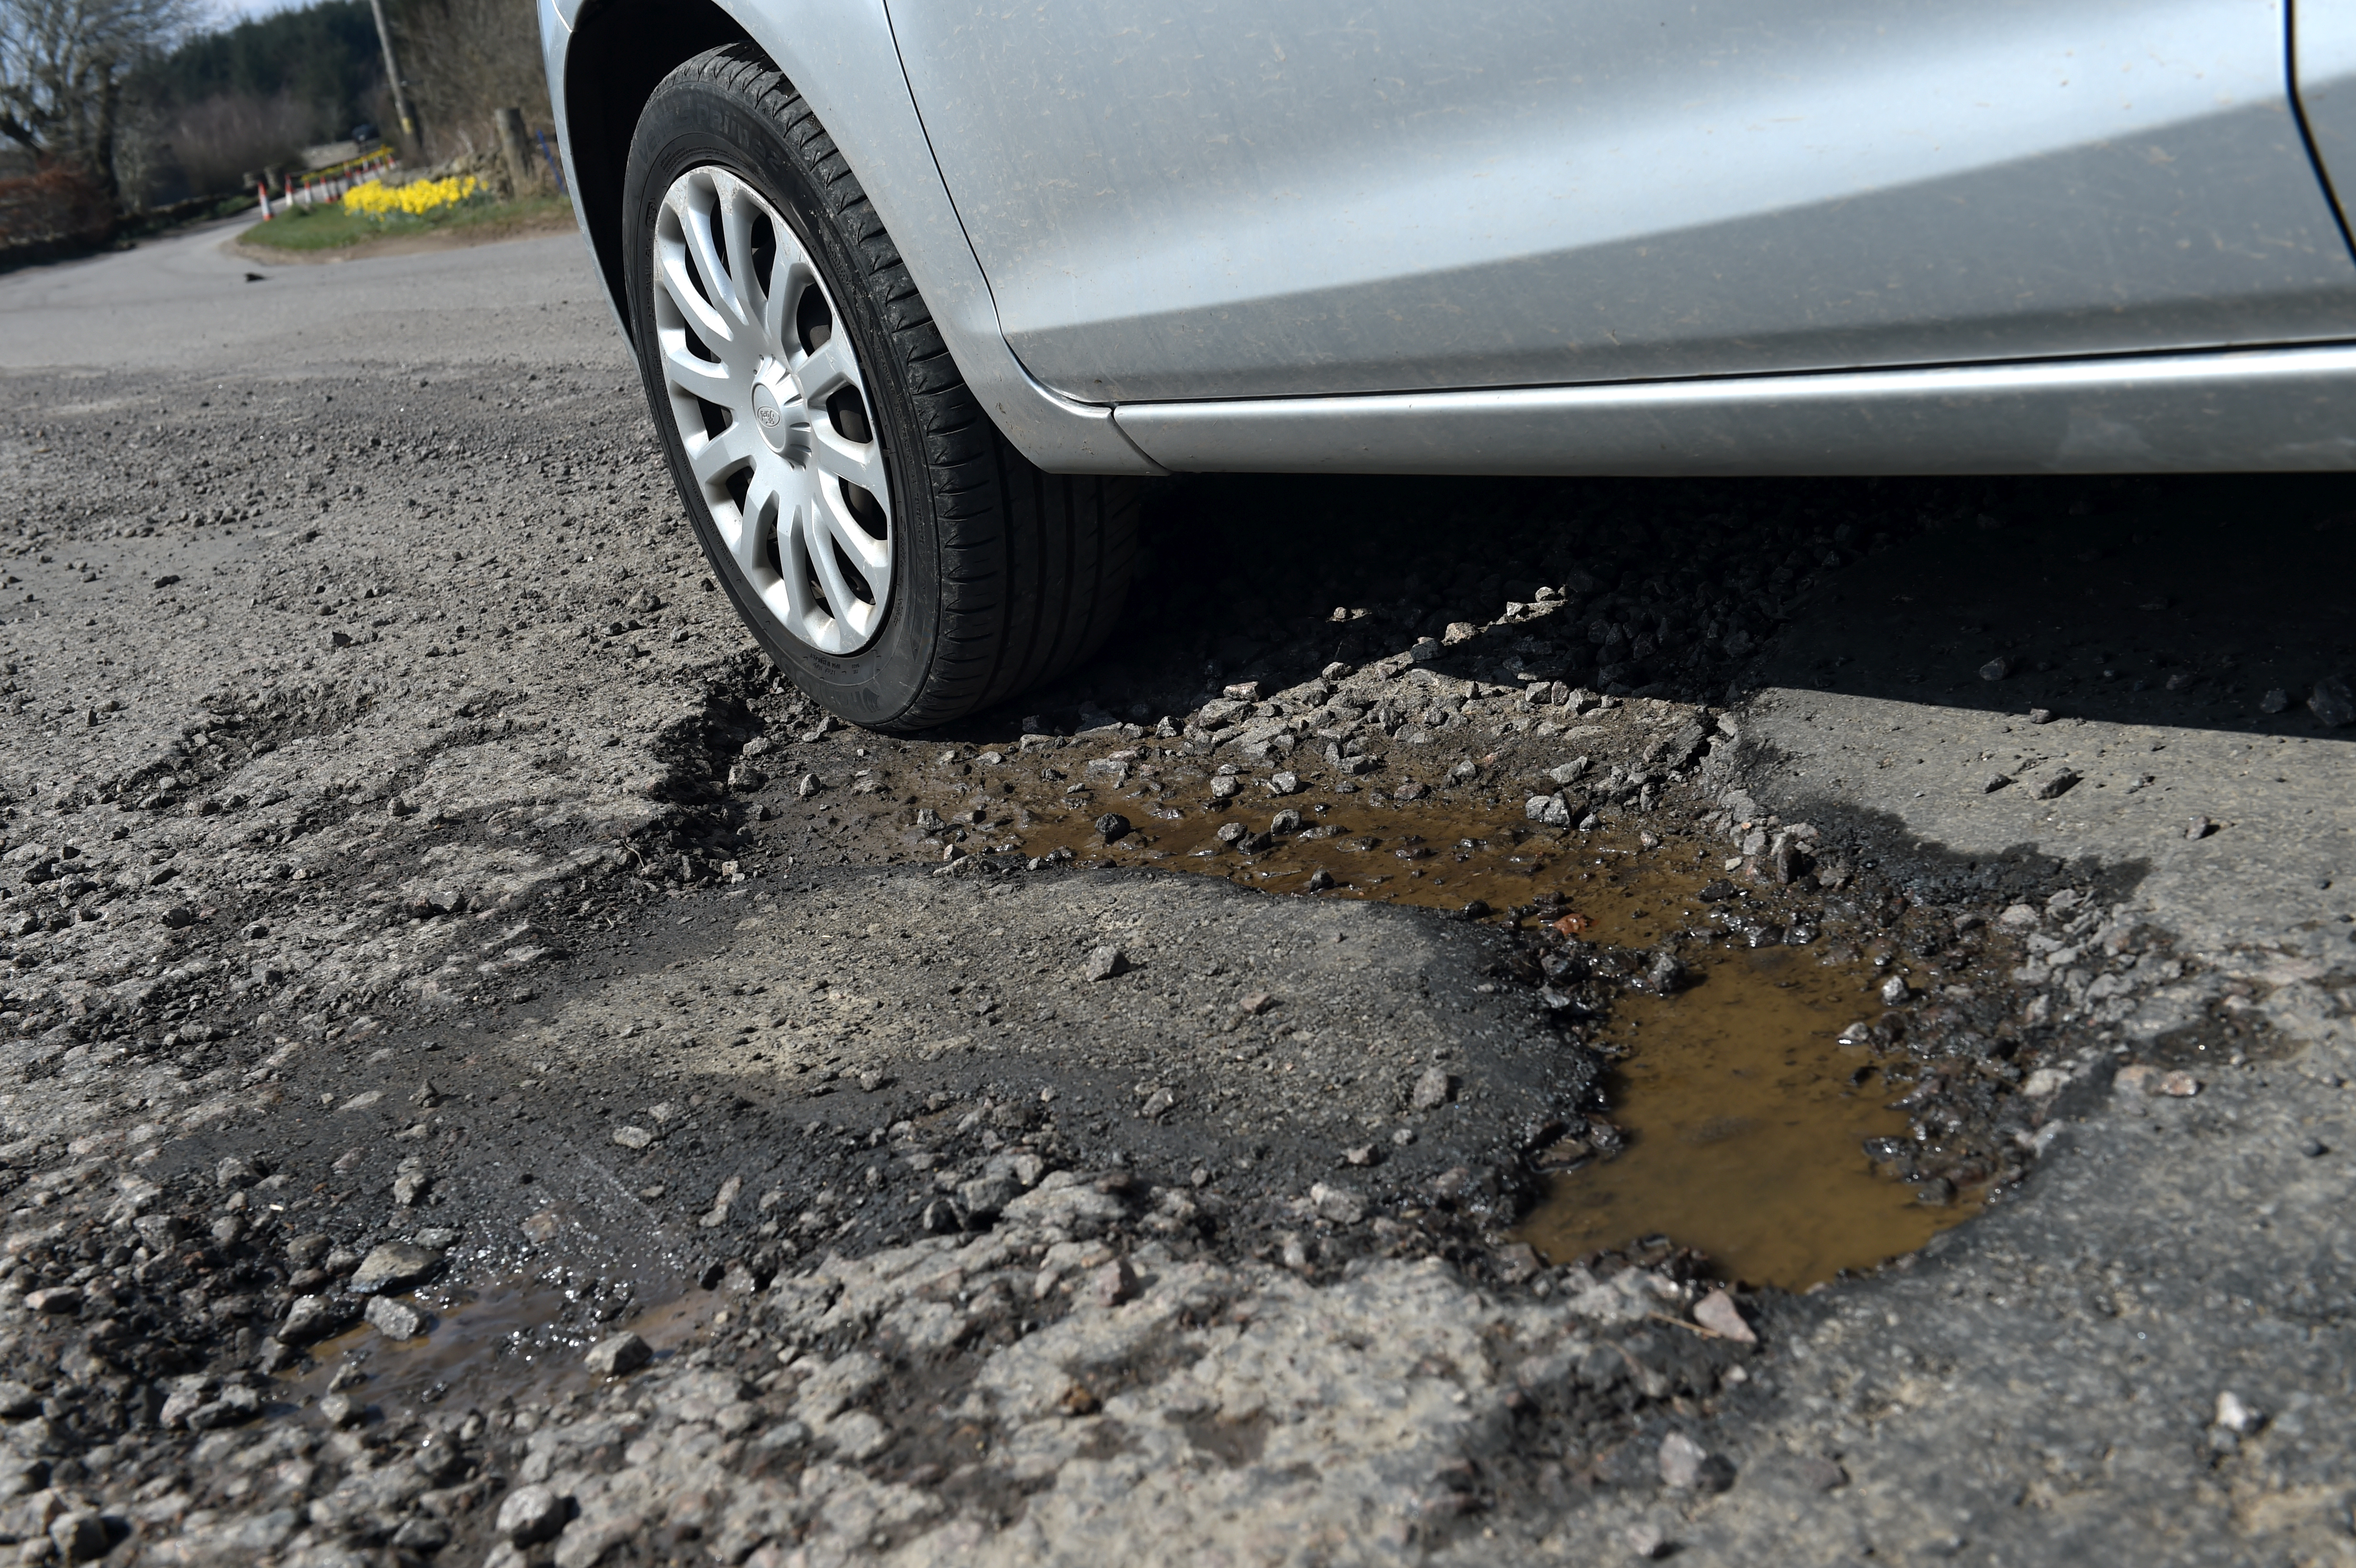 The state of the region's roads has come into sharp focus.